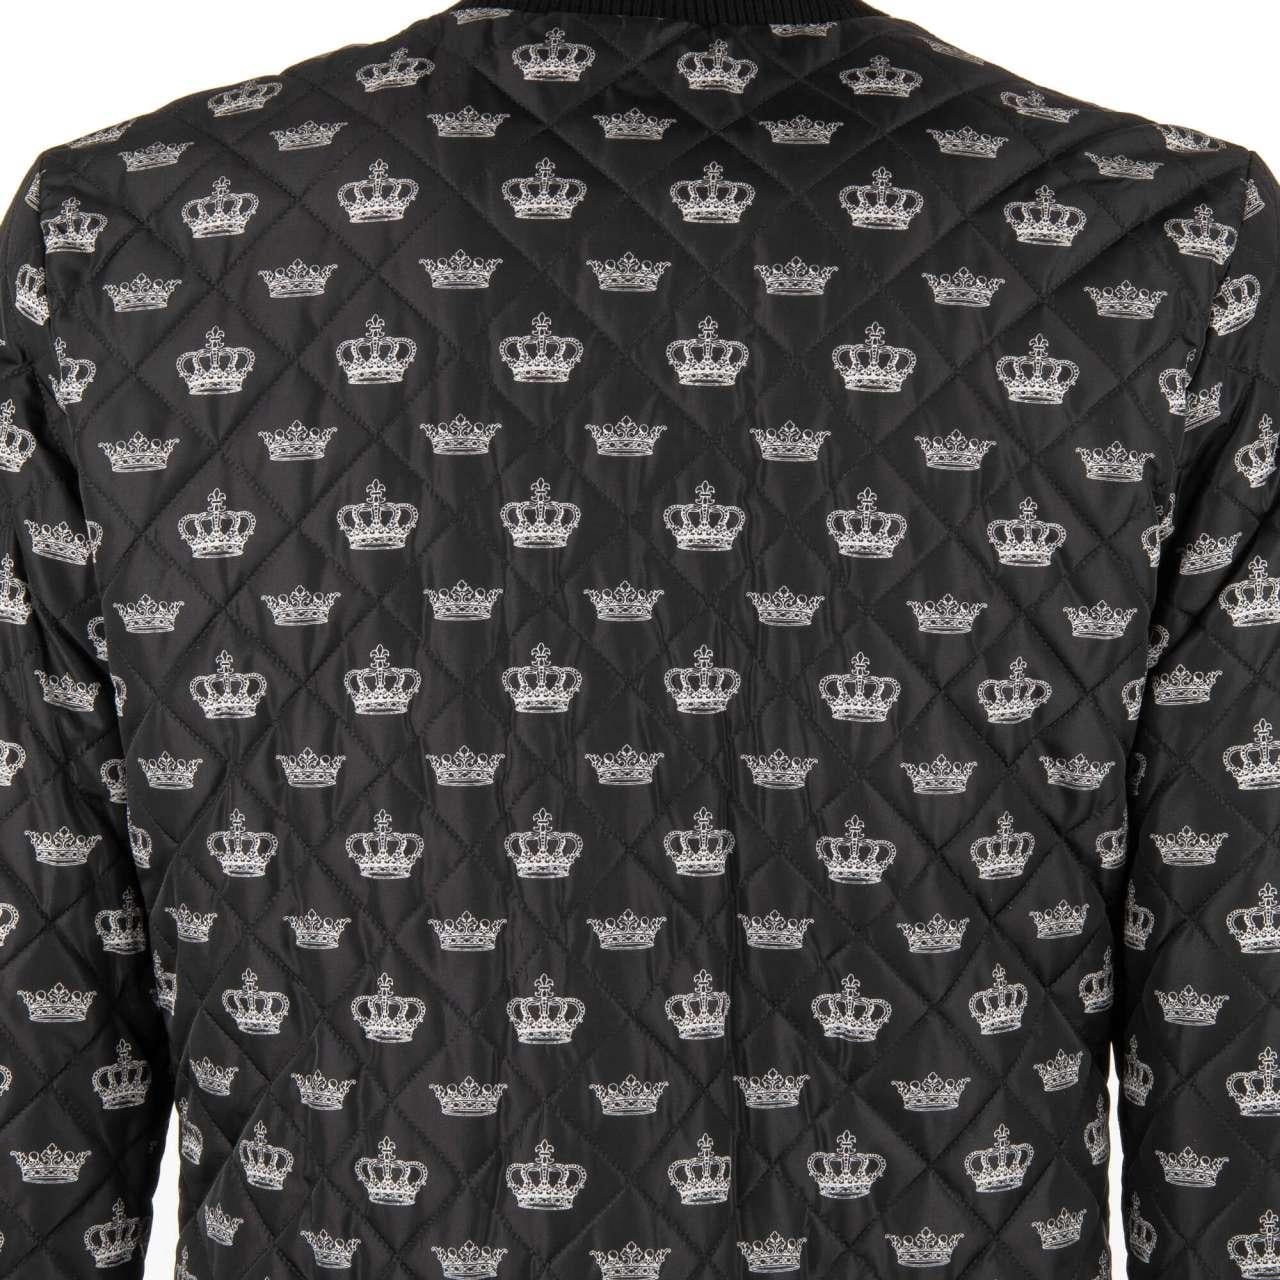 D&G Quilted Crowns Printed Bomber Jacket with Leather Details Black 46 For Sale 1